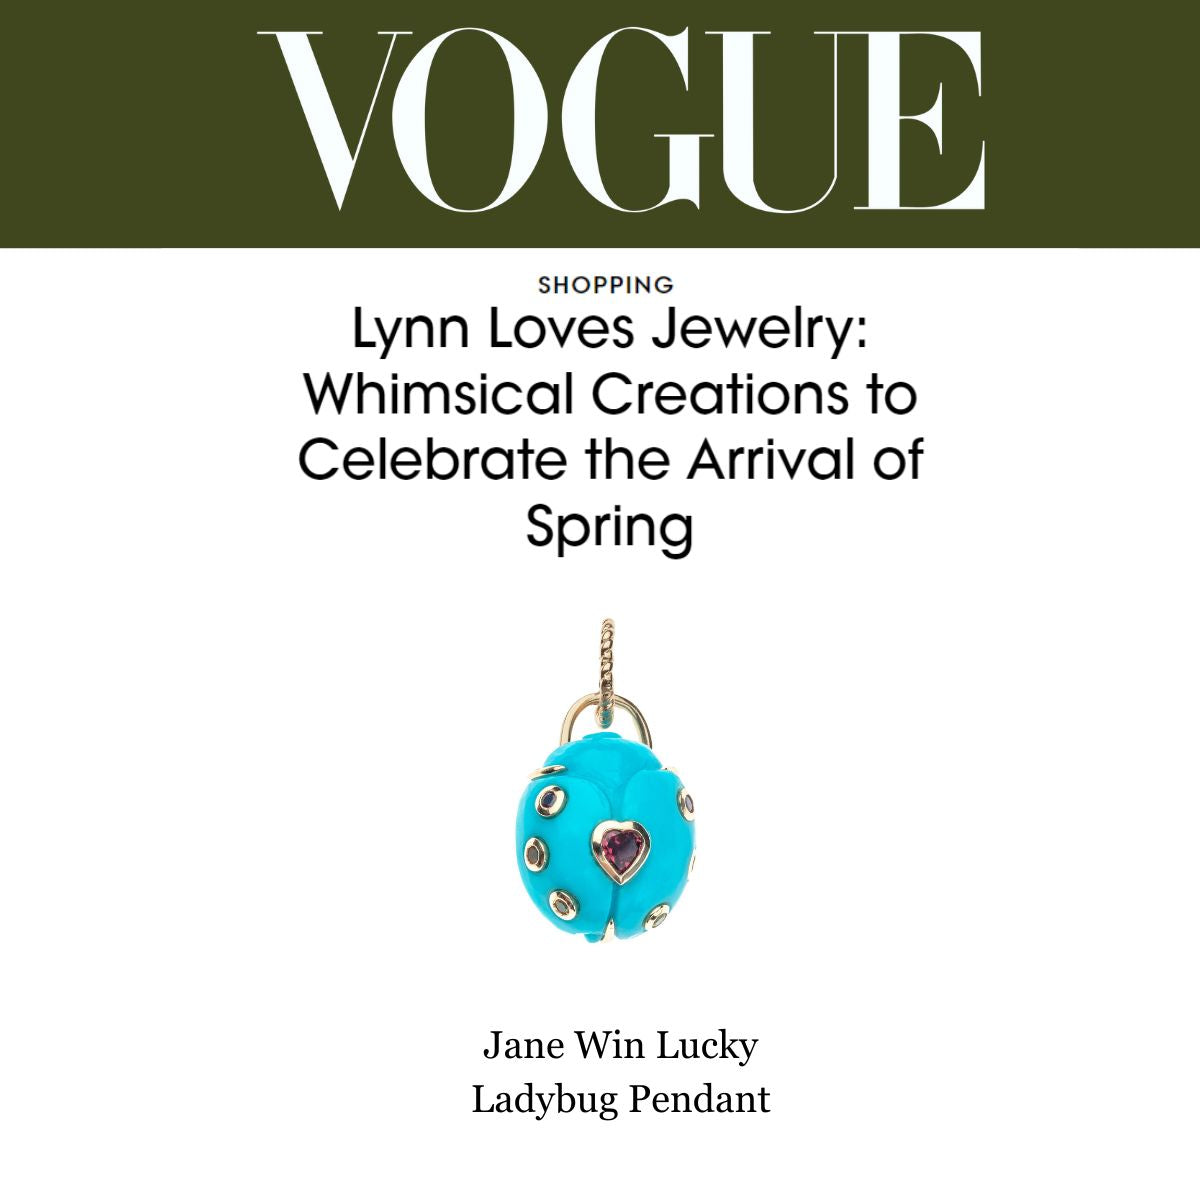 Press Highlight: VOGUE's "Whimsical Creations to Celebrate the Arrival of Spring"